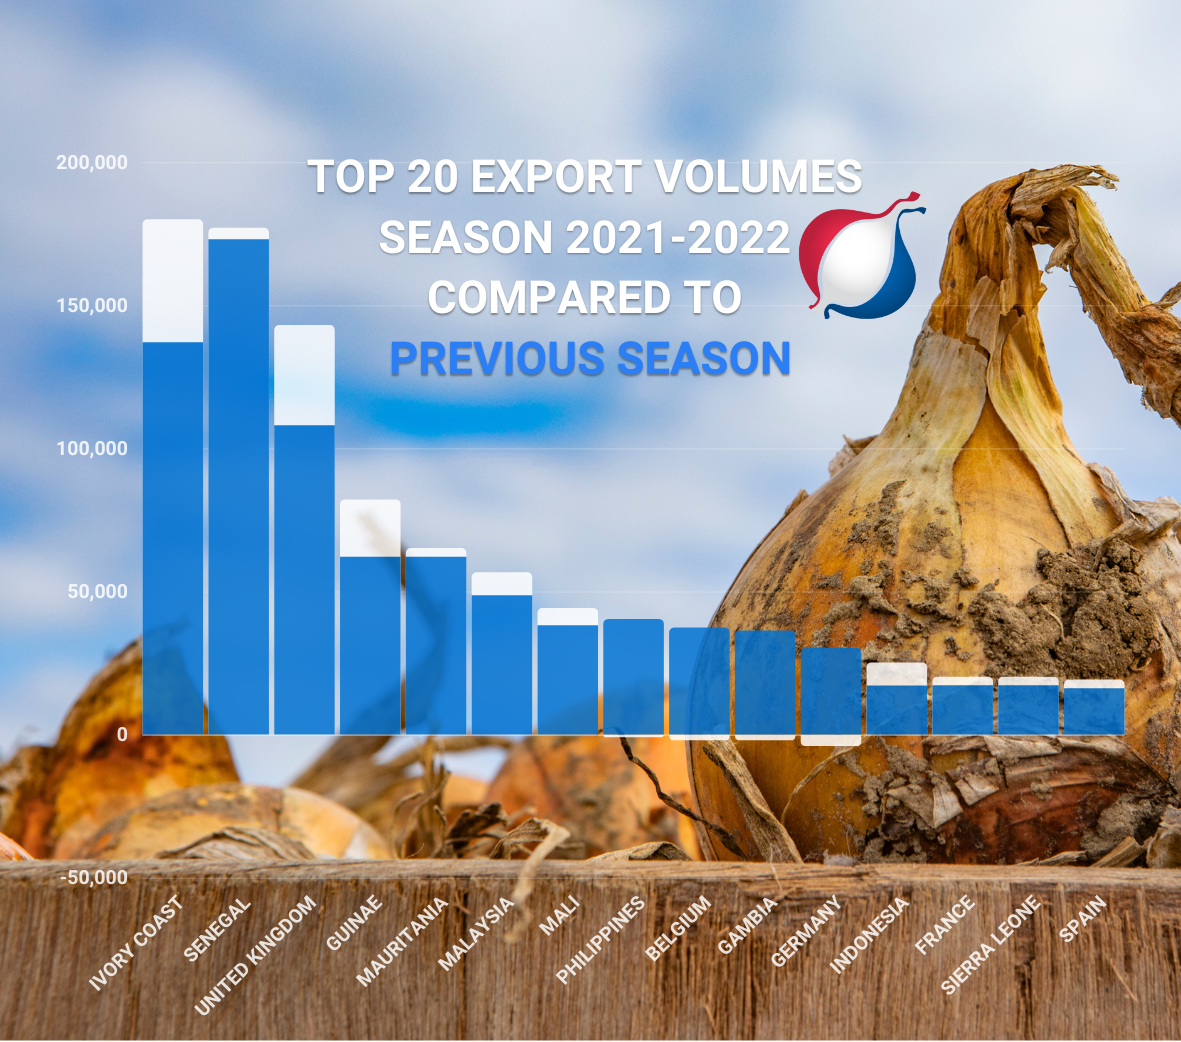 HOA_Top 20 HOlland Onion importing countries 2022